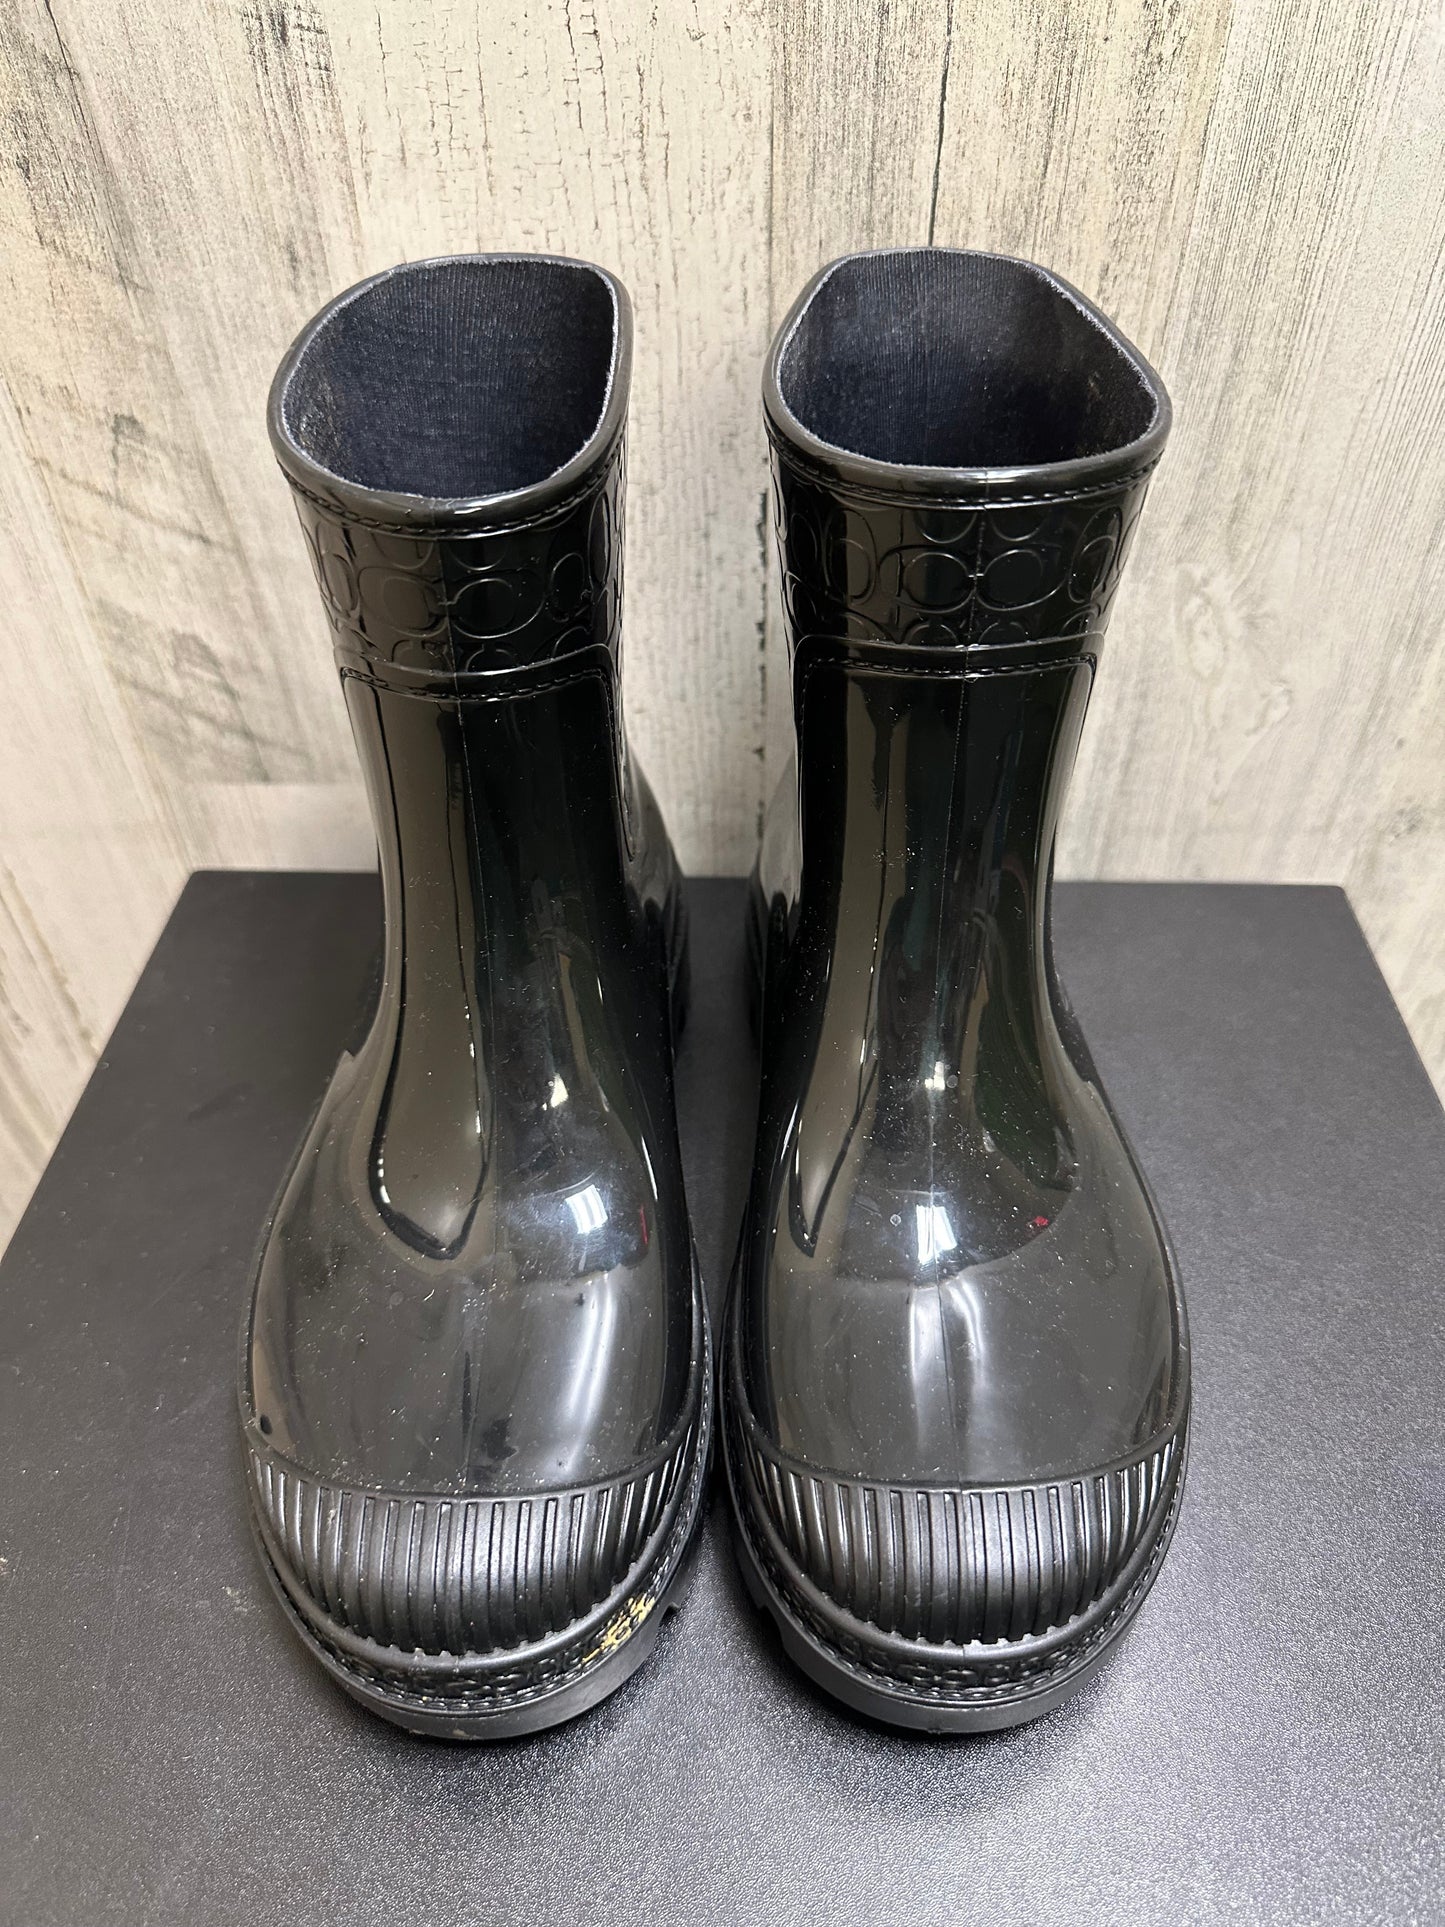 Boots Rain By Coach  Size: 7